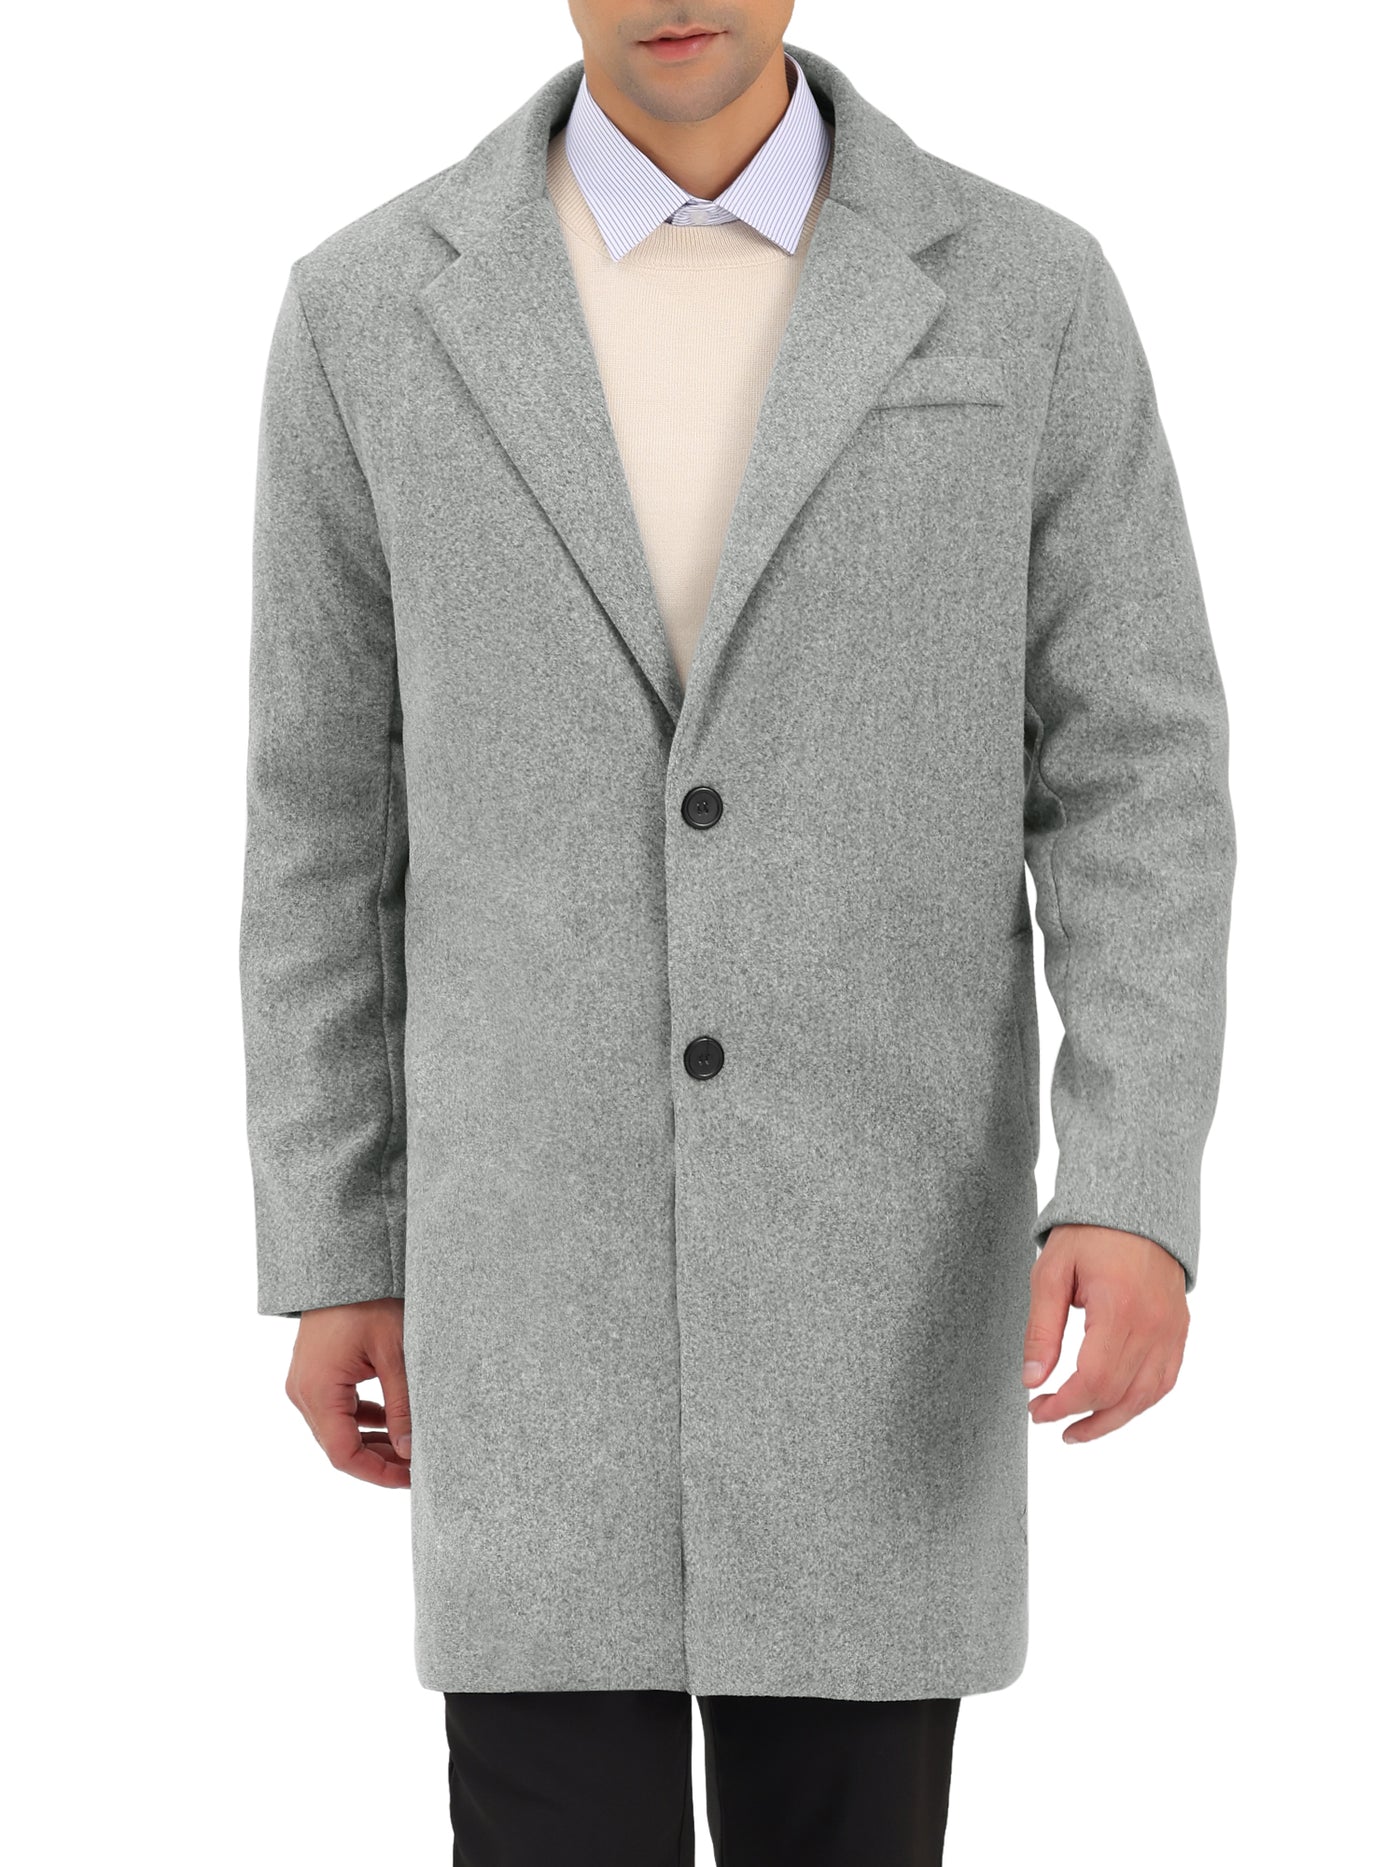 Bublédon Men's Trench Coat Single Breasted Lapel Collar Mid-Length Solid Overcoat